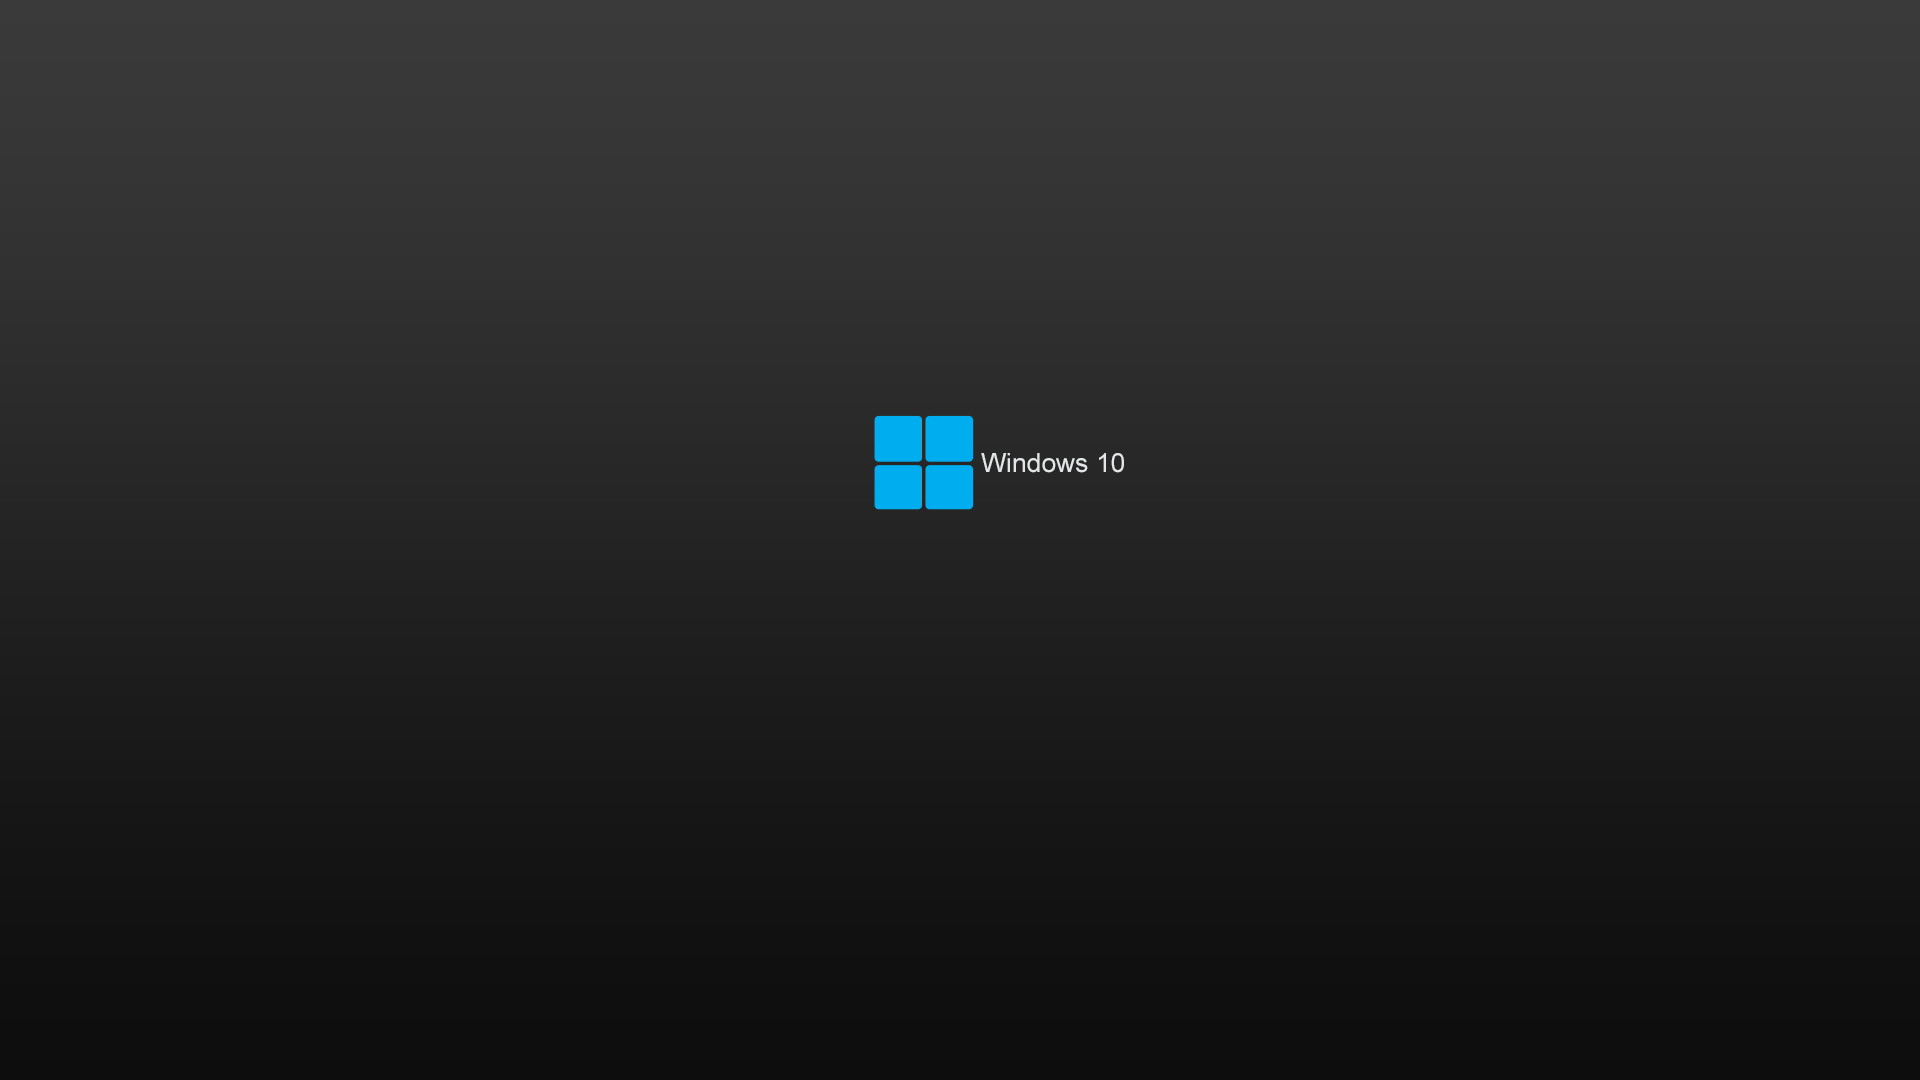 Free download Black Wallpaper Windows 10 61 images [1920x1080] for your